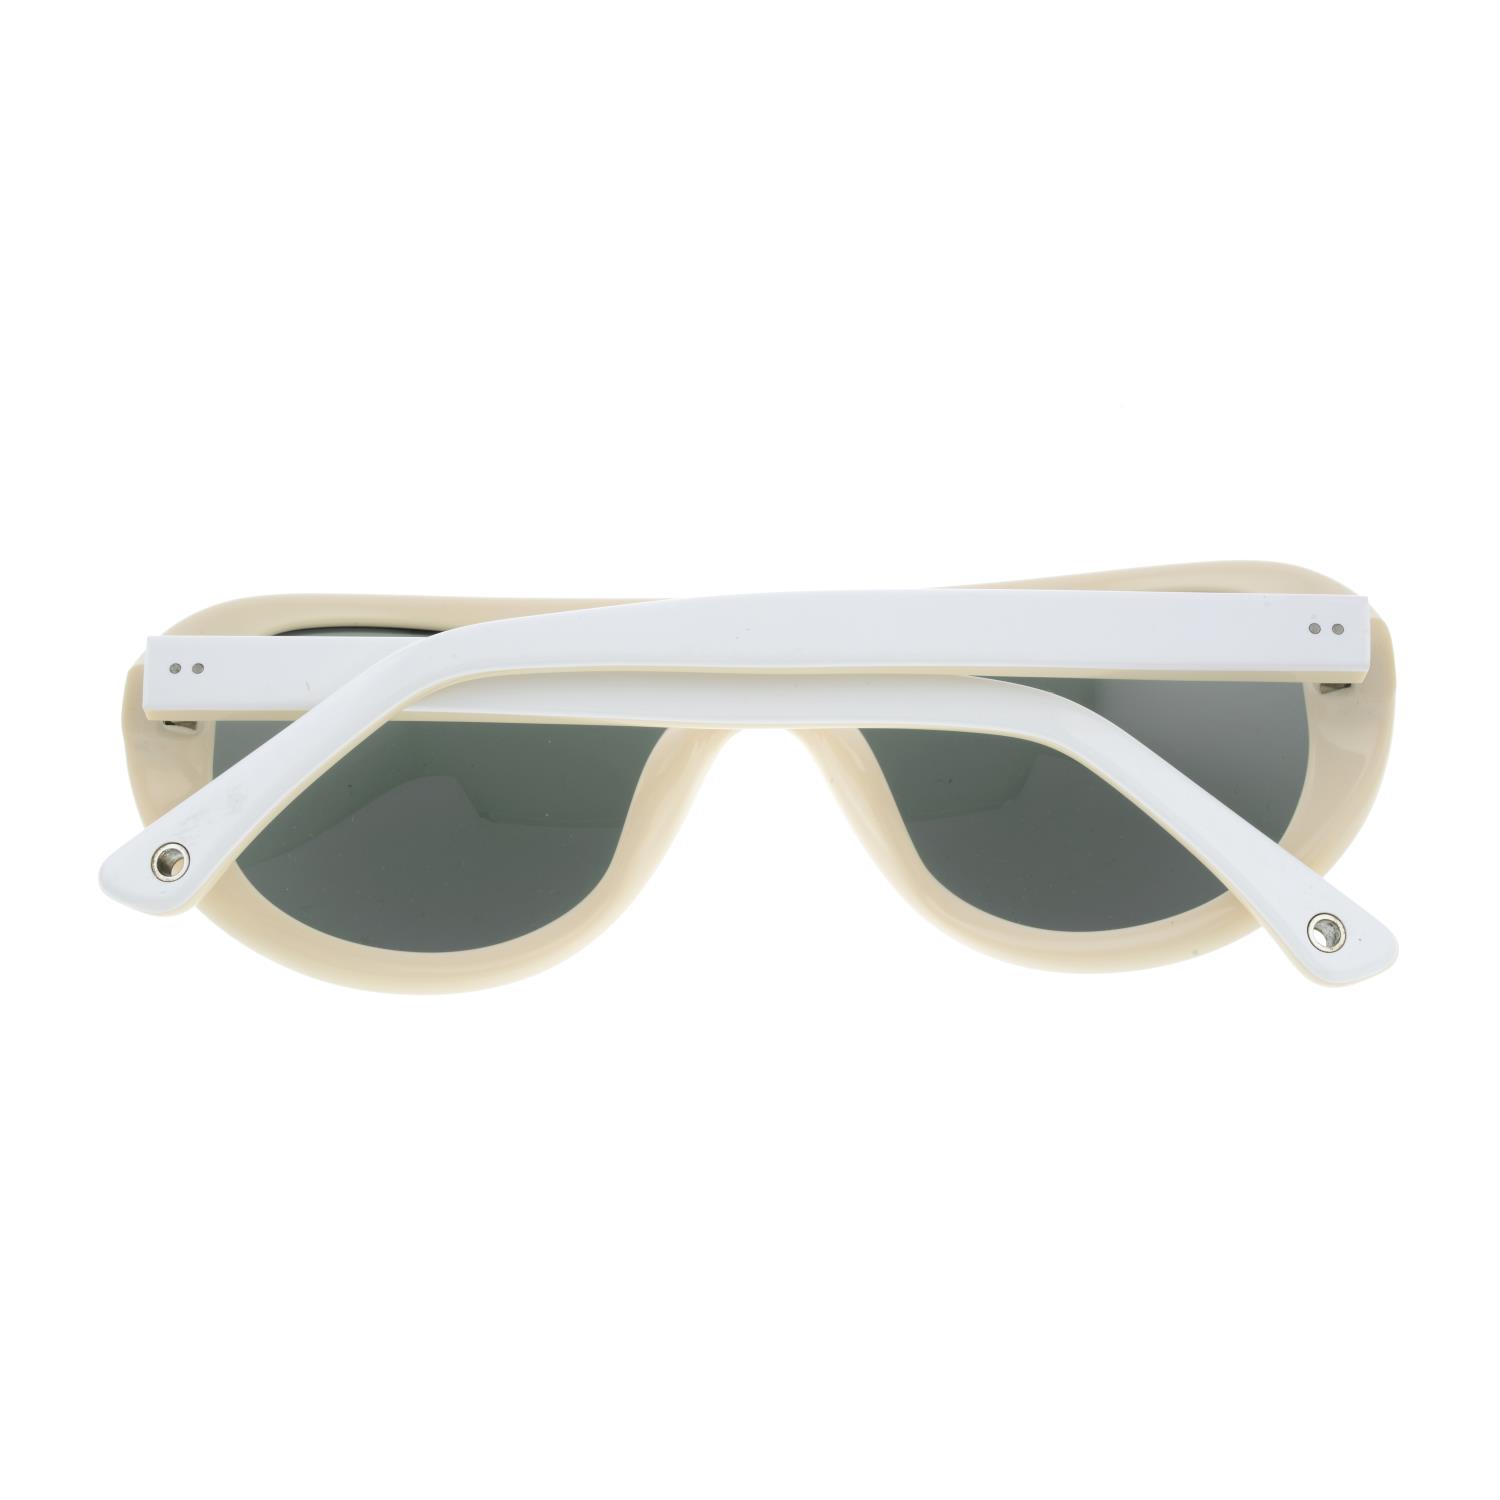 MONCLER - a pair of white sunglasses. - Image 2 of 4